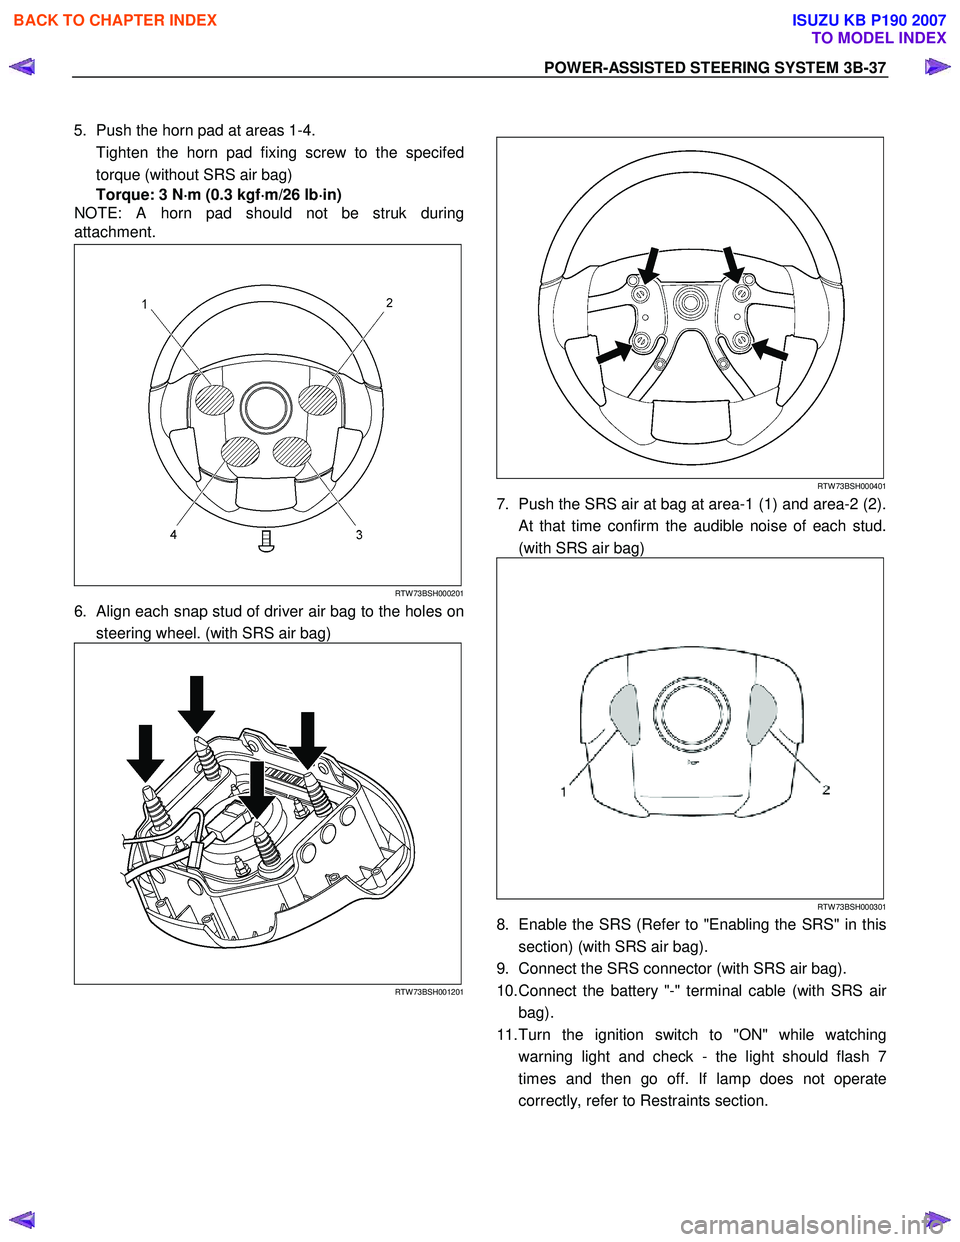 ISUZU KB P190 2007  Workshop Owners Guide POWER-ASSISTED STEERING SYSTEM 3B-37 
 
5.  Push the horn pad at areas 1-4.  
  Tighten the horn pad fixing screw to the specifed torque (without SRS air bag)  
Torque: 3 N ⋅
⋅⋅ 
⋅
m (0.3 kgf 